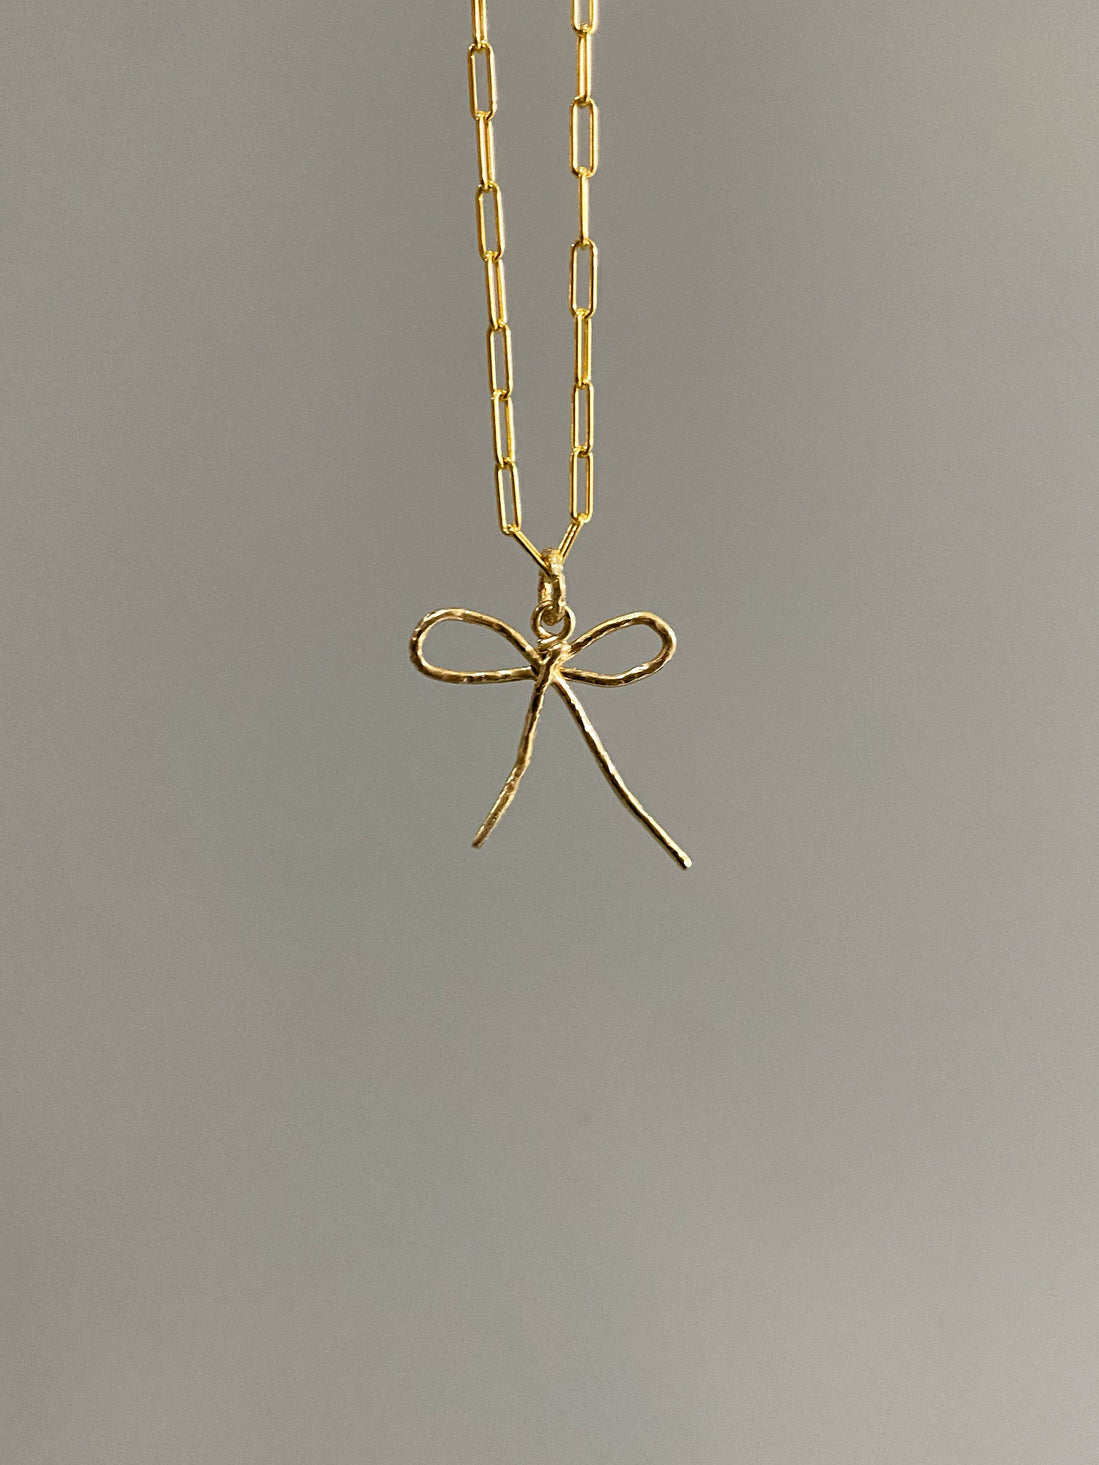 Gold bow pendant on large link chain with grey background